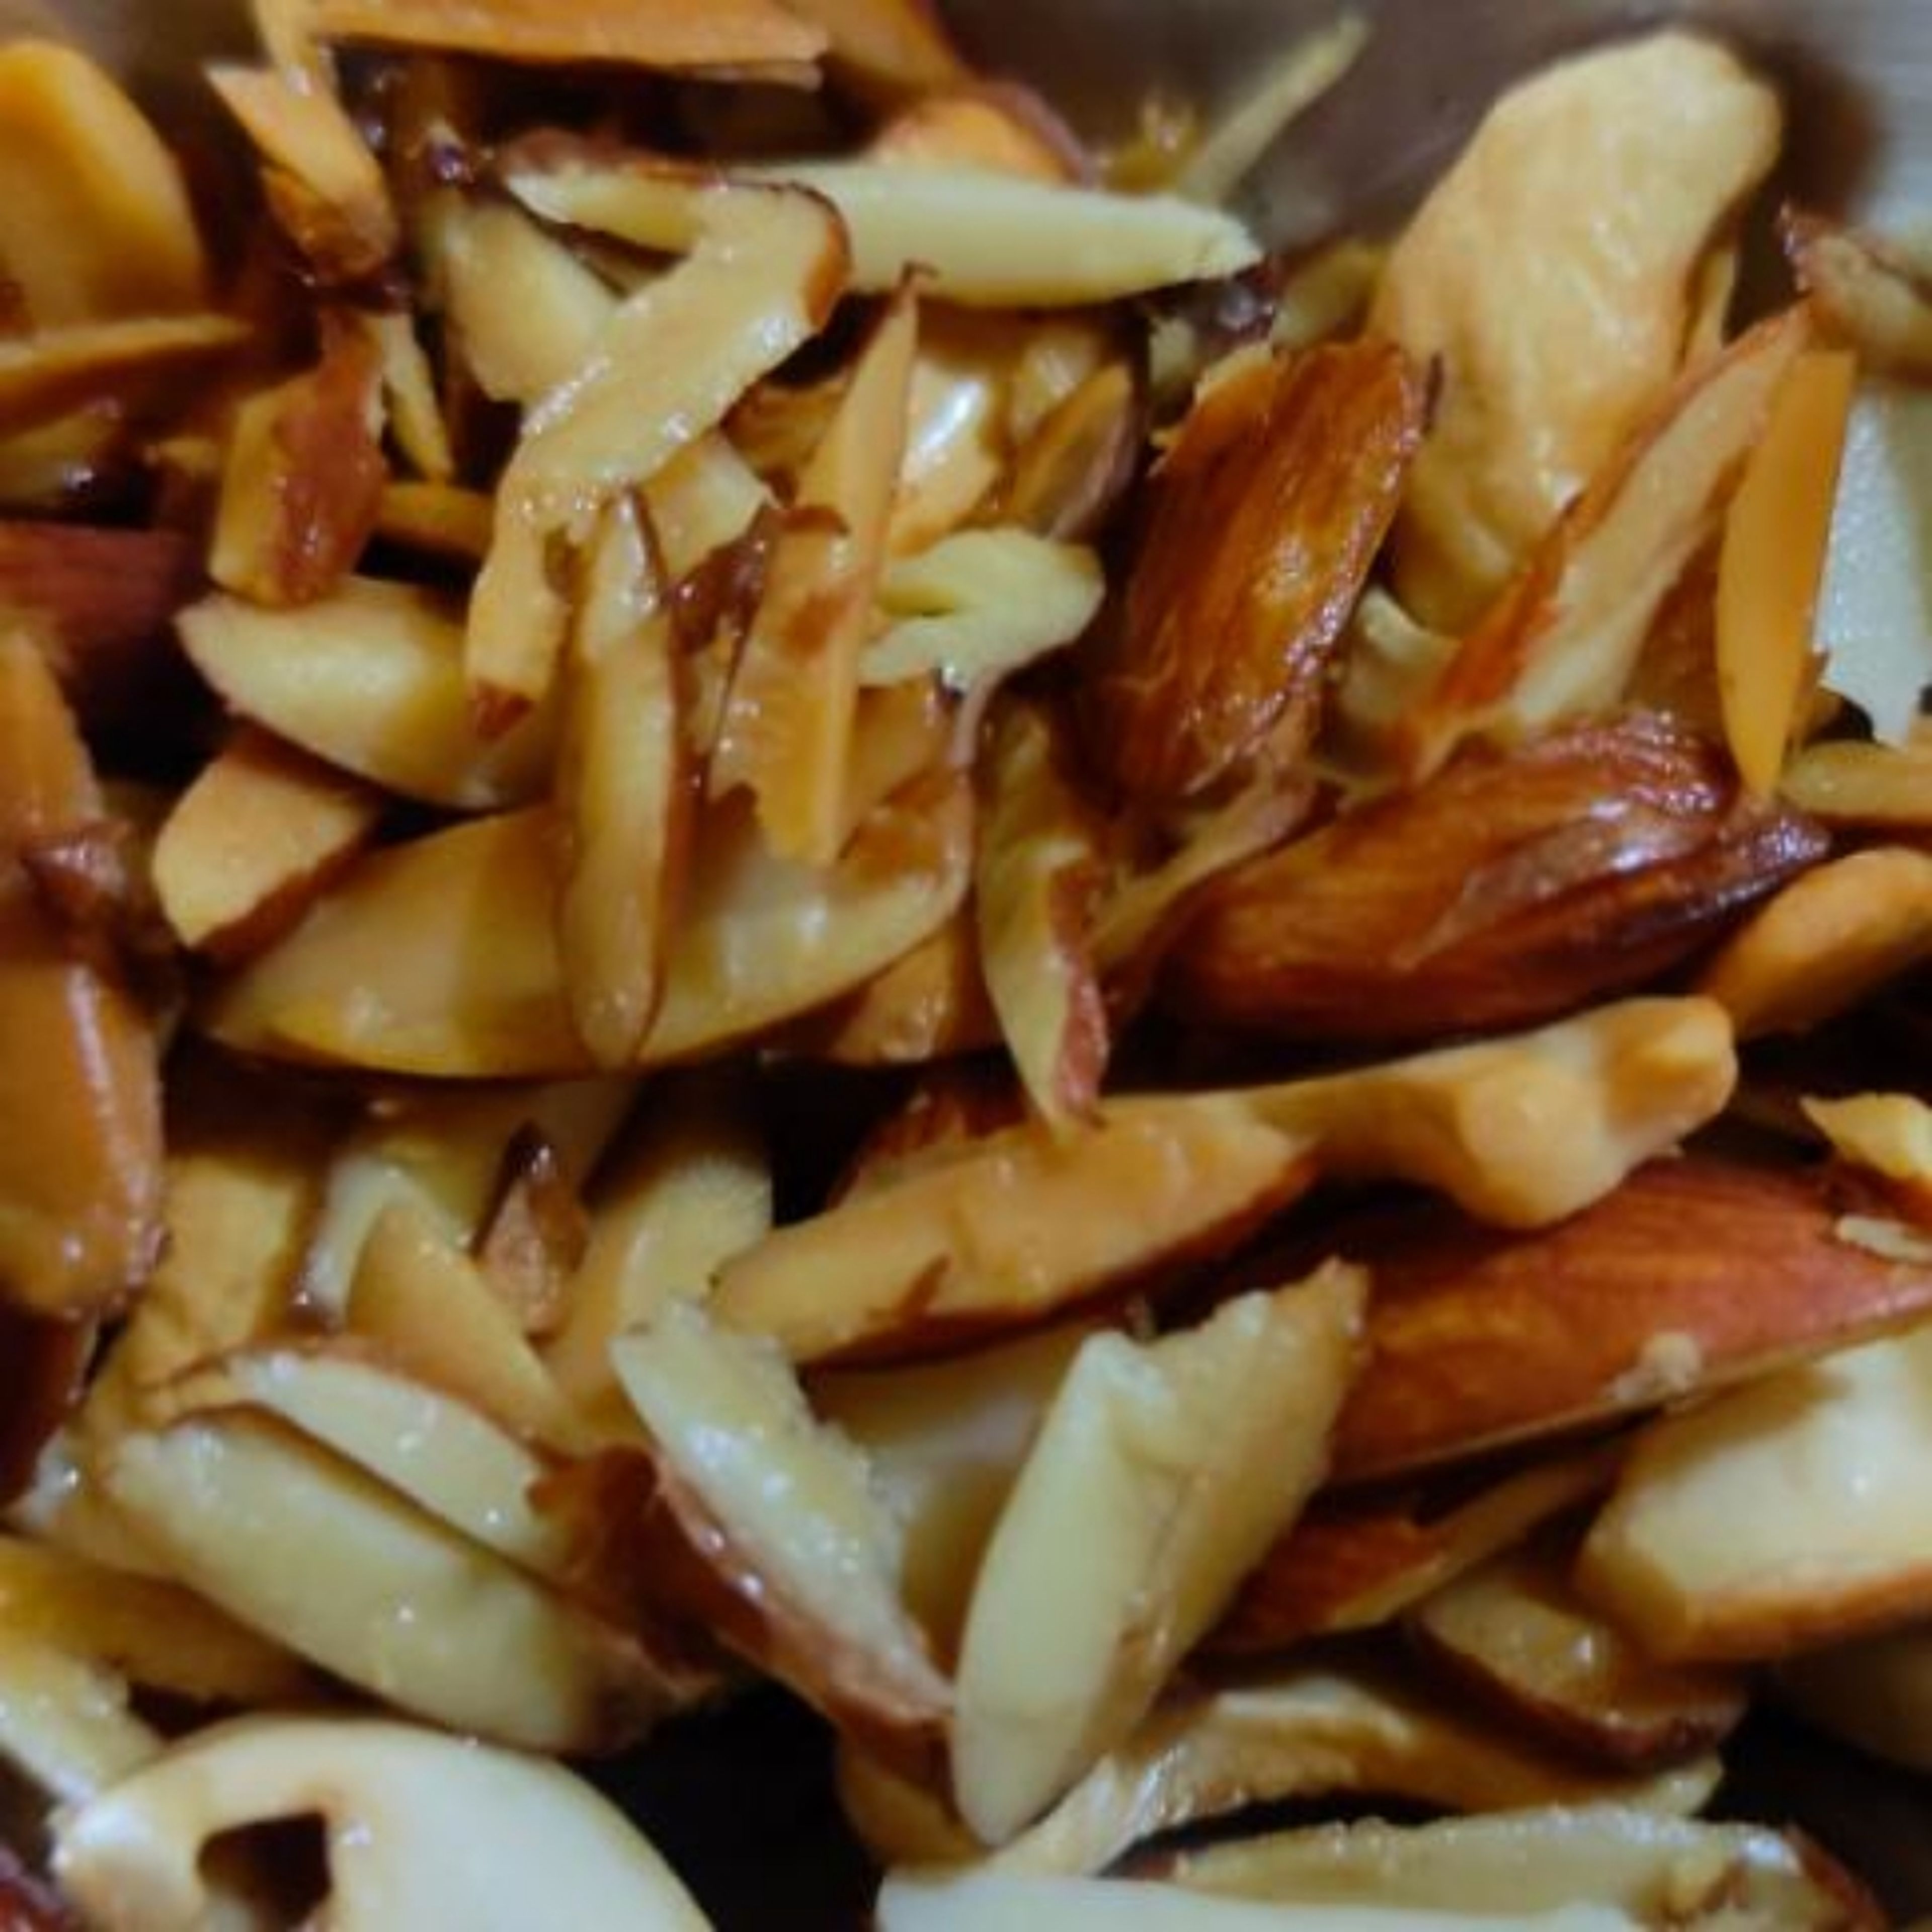 Heat the Ghee in the utensil, and fry chopped almonds and cashews till they turn Golden. Take them out and keep aside